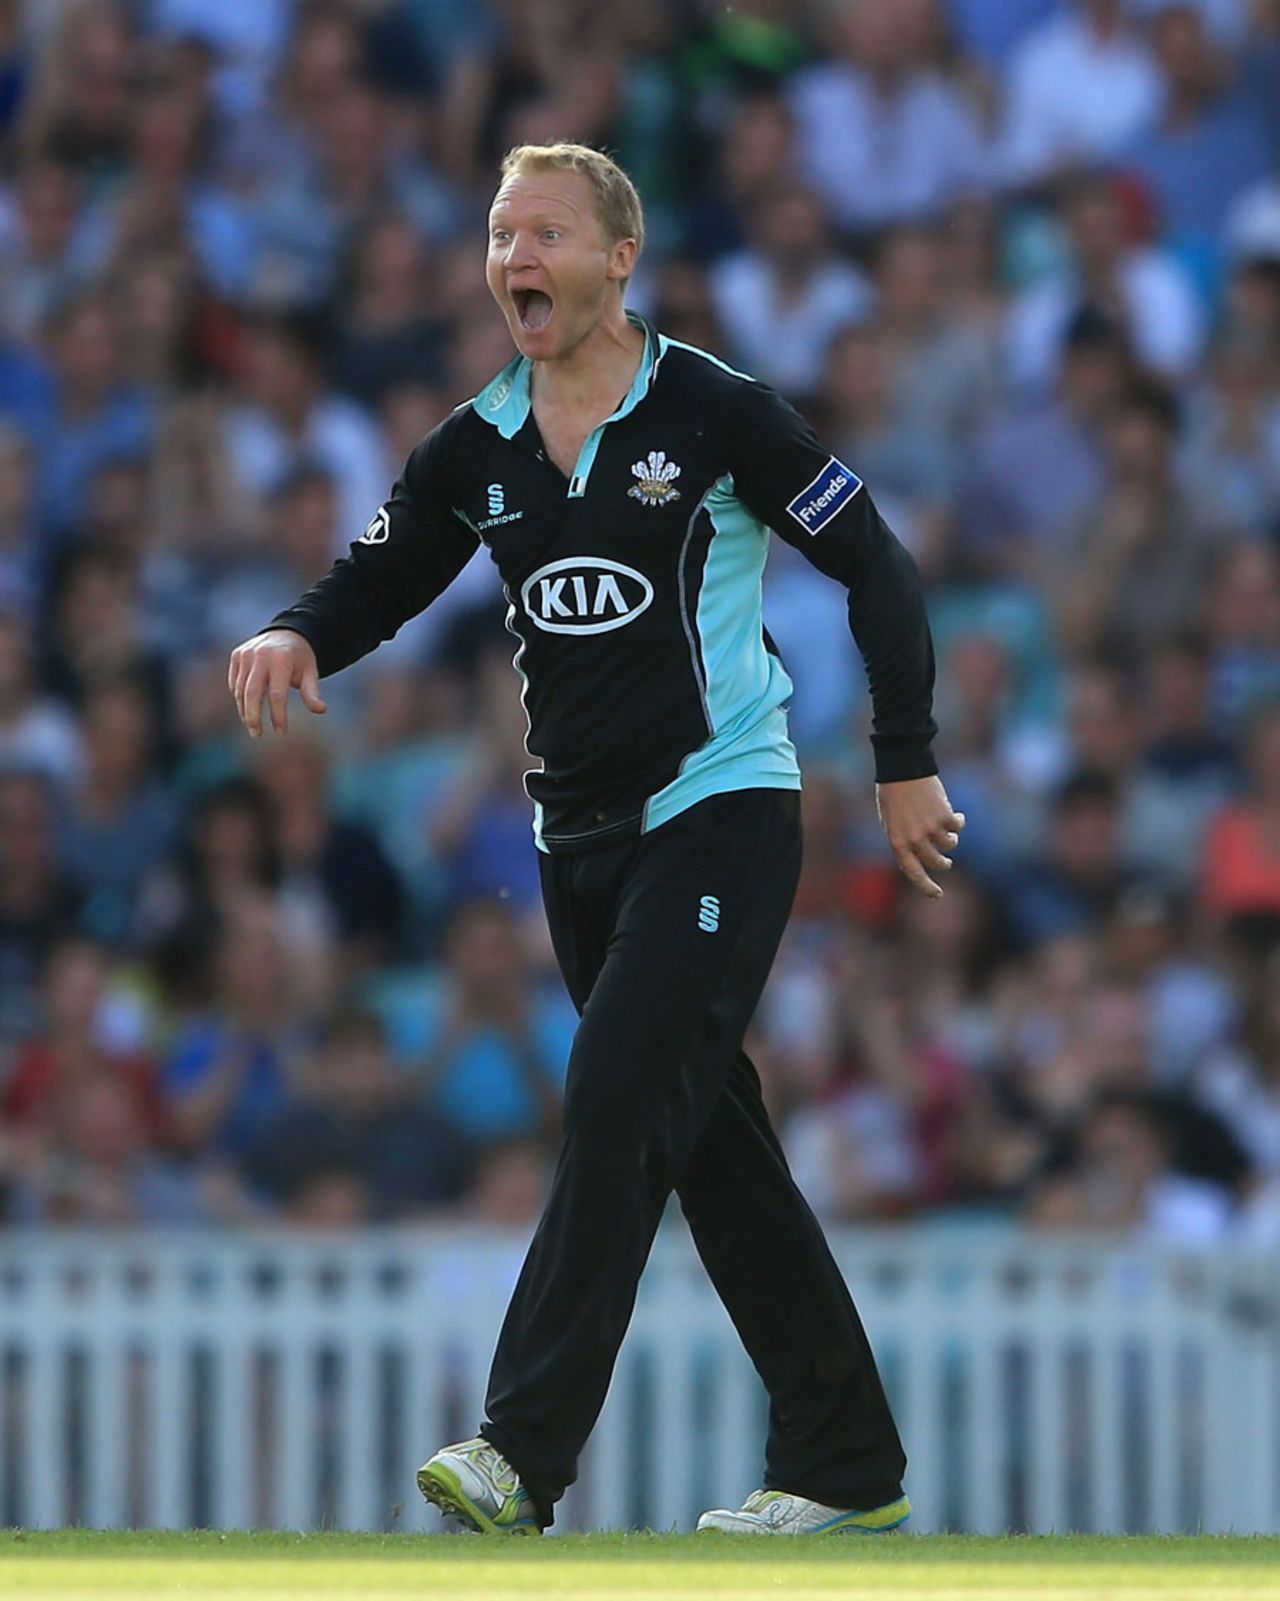 Gareth Batty took 2 for 14 from his four overs, Surrey v Kent, FLt20 South Group, The Oval, July 26, 2013